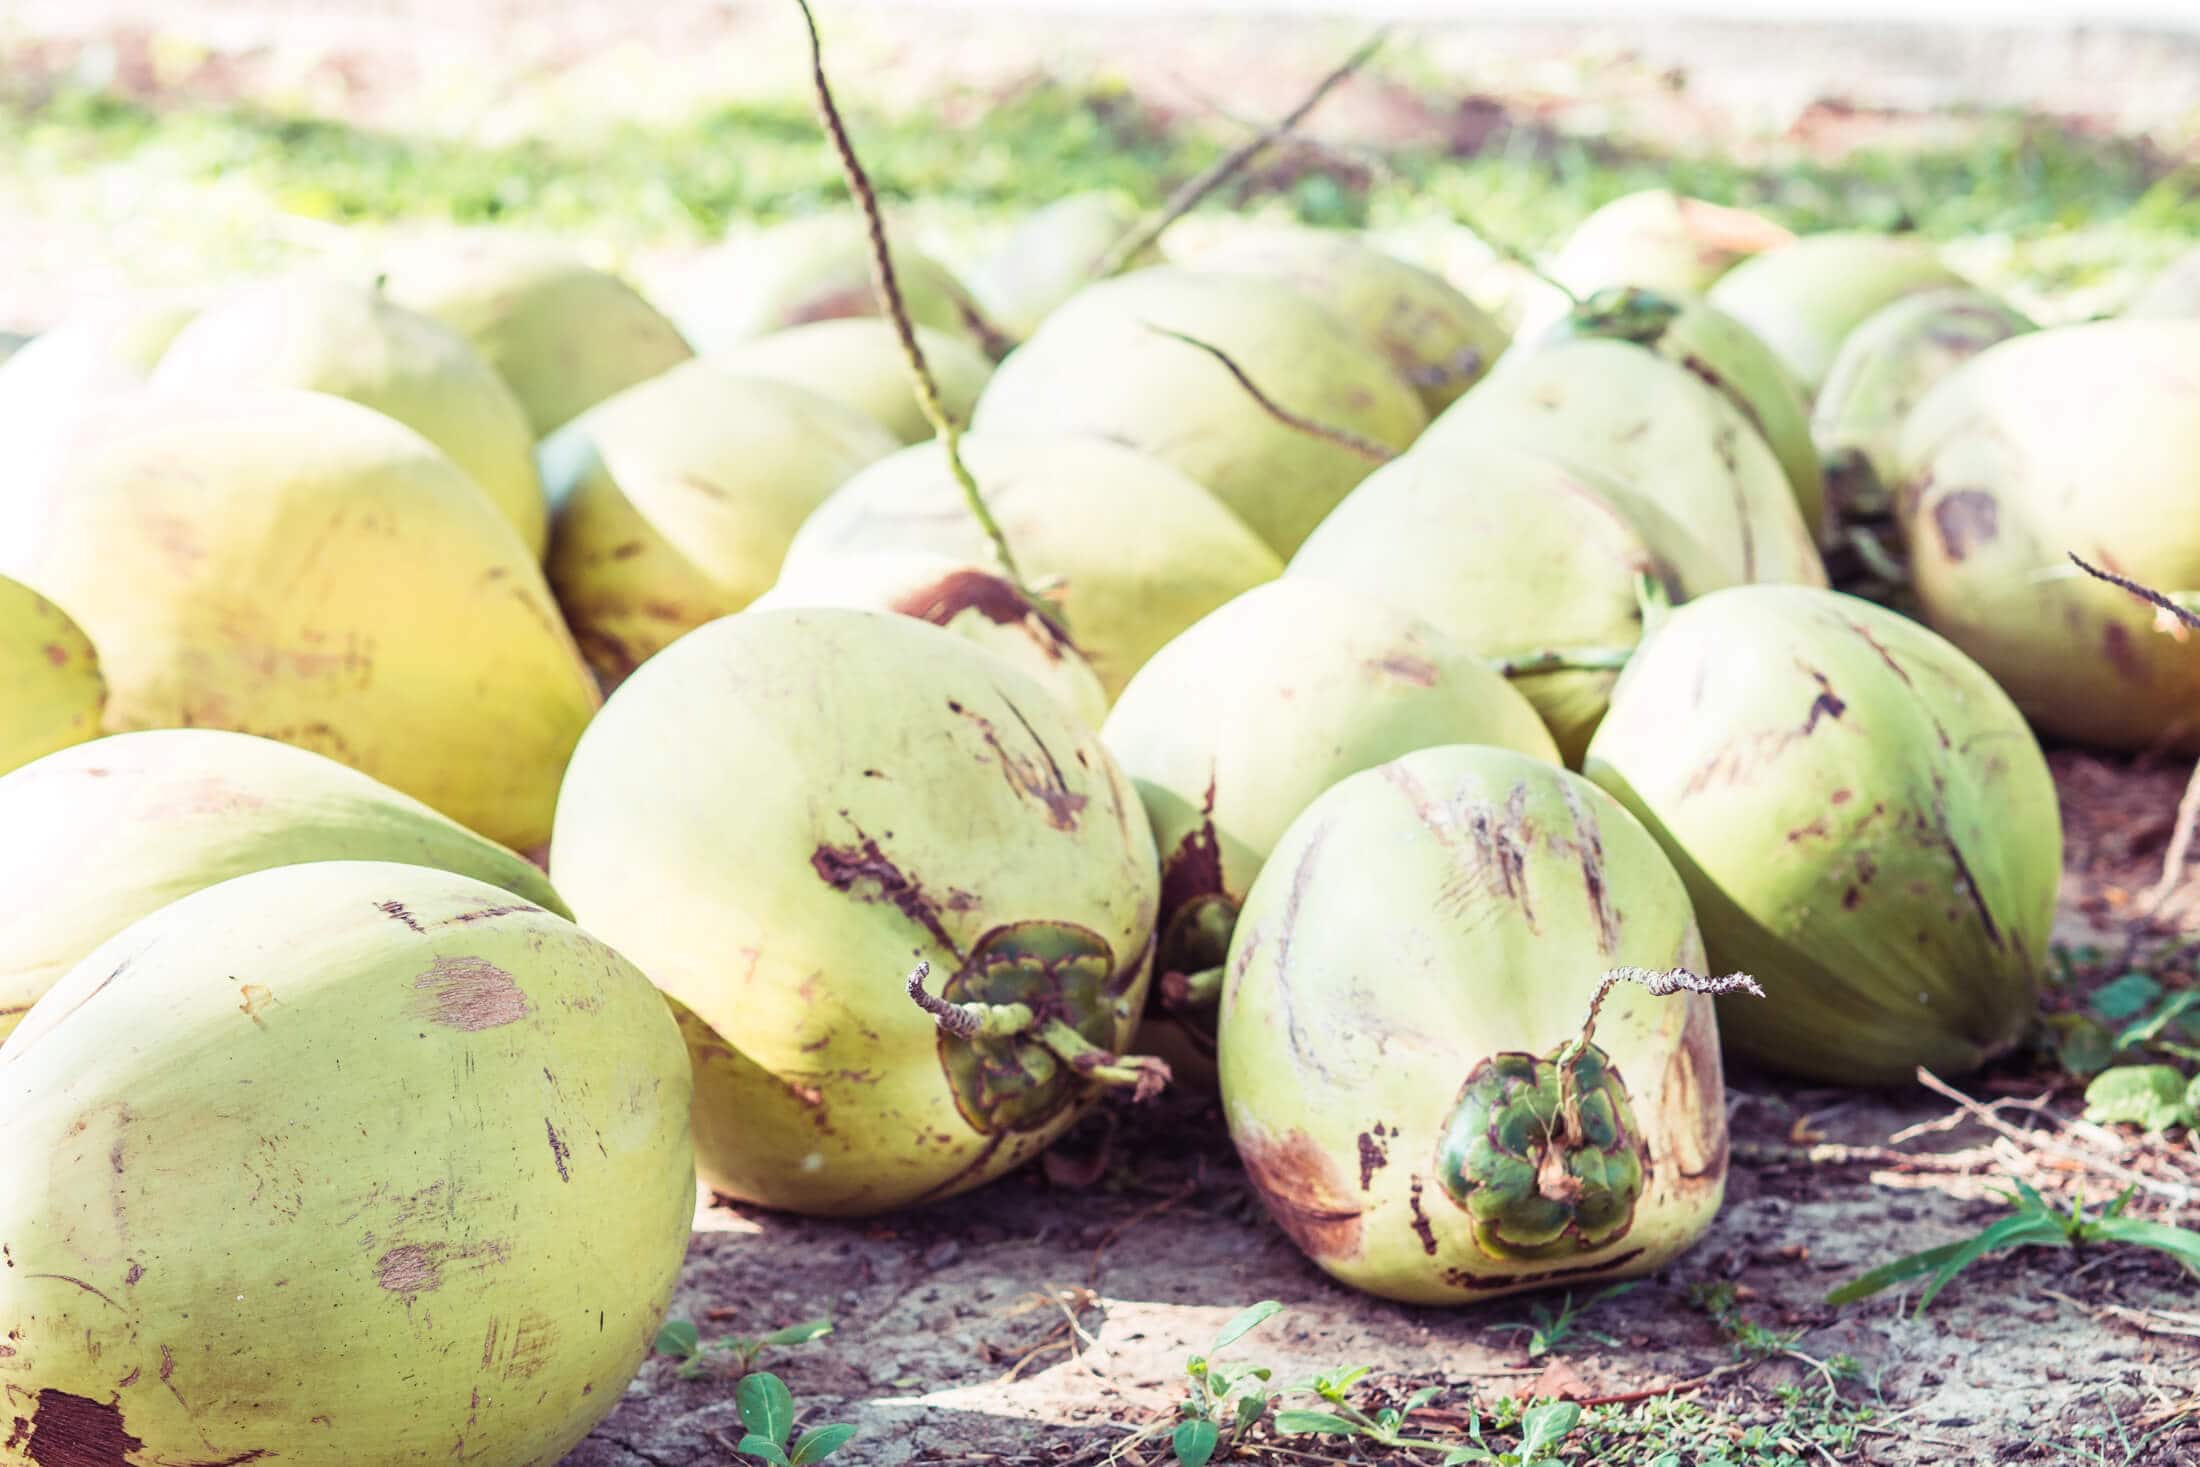 Coconuts at Whales & Waves Resort in Sumbawa, Indonesia - The most amazing place I've ever been